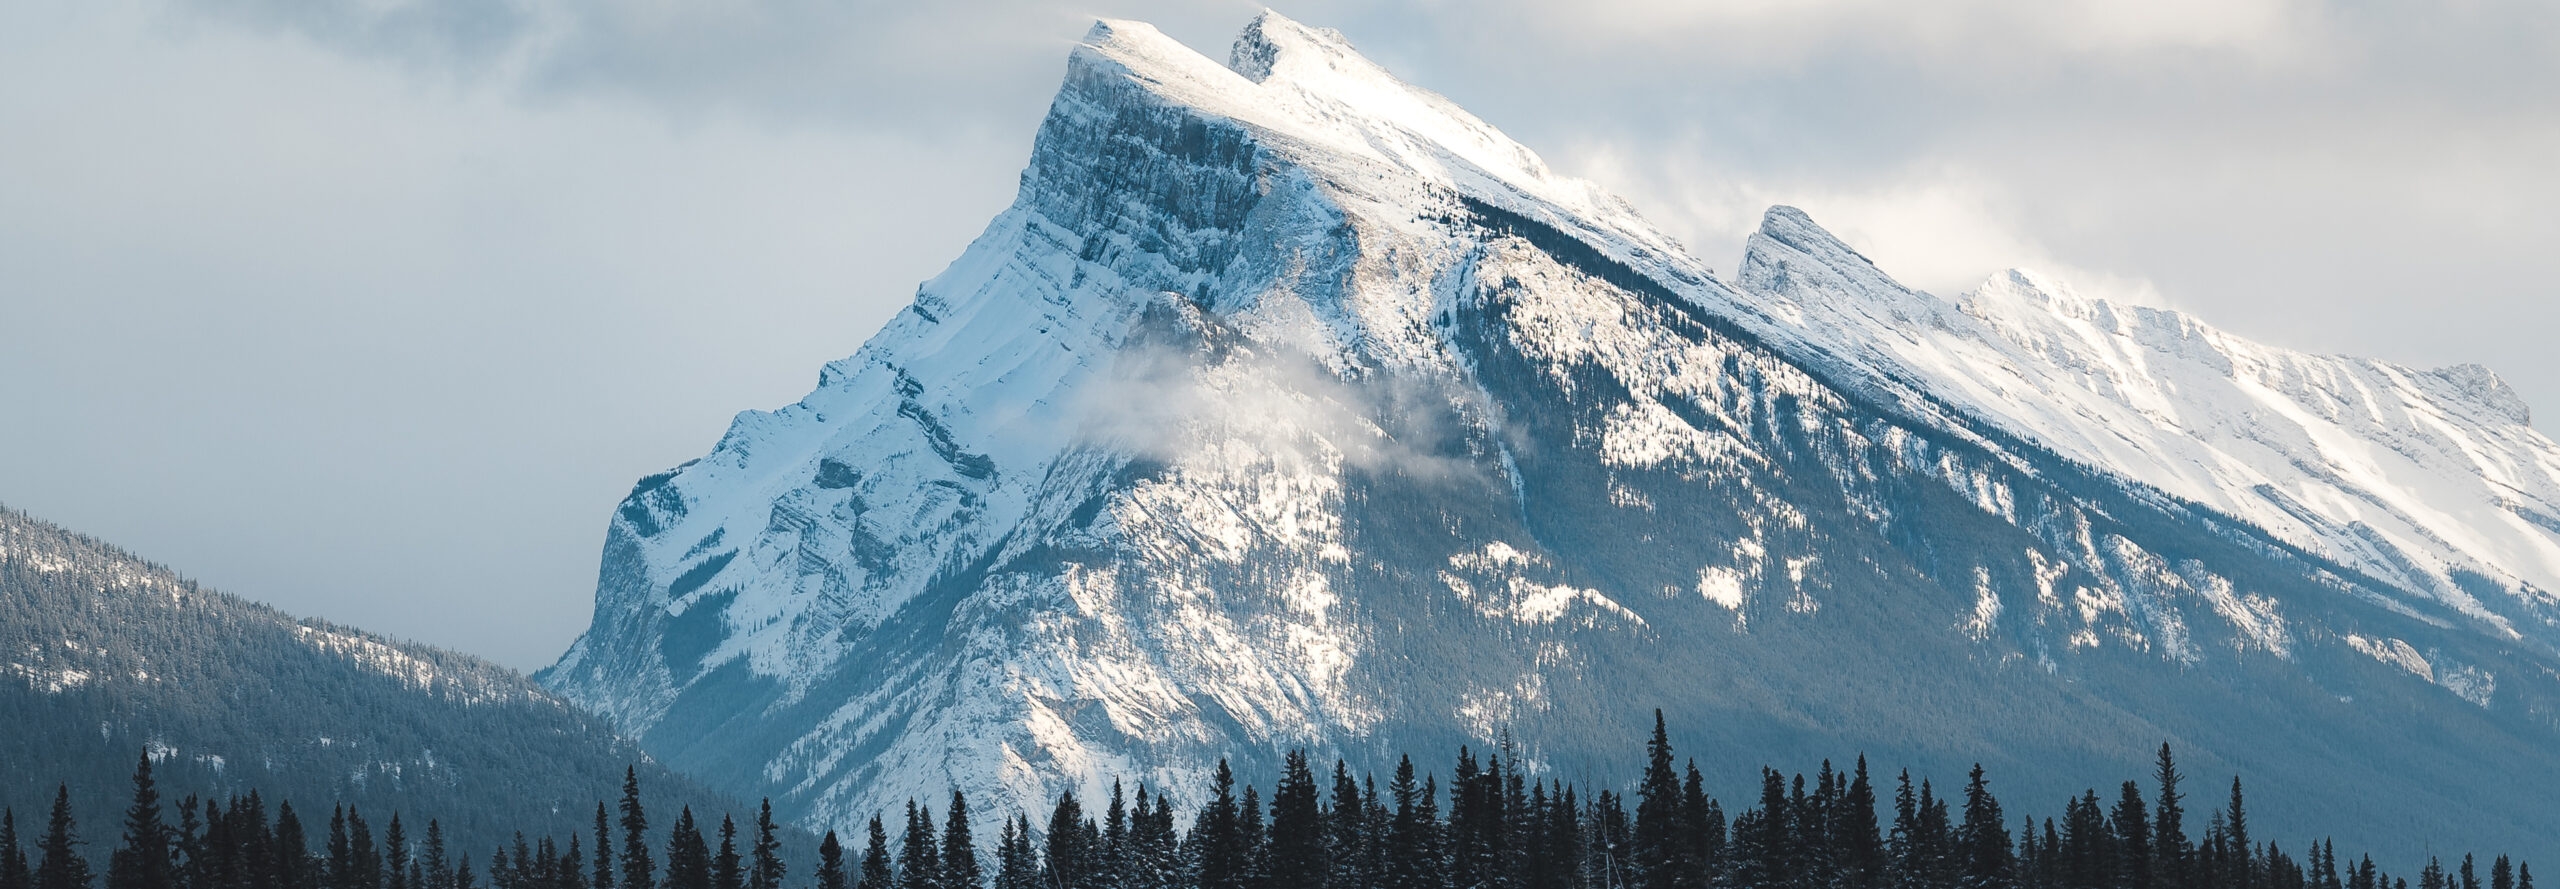 Rundle Mountain in Banff National Park